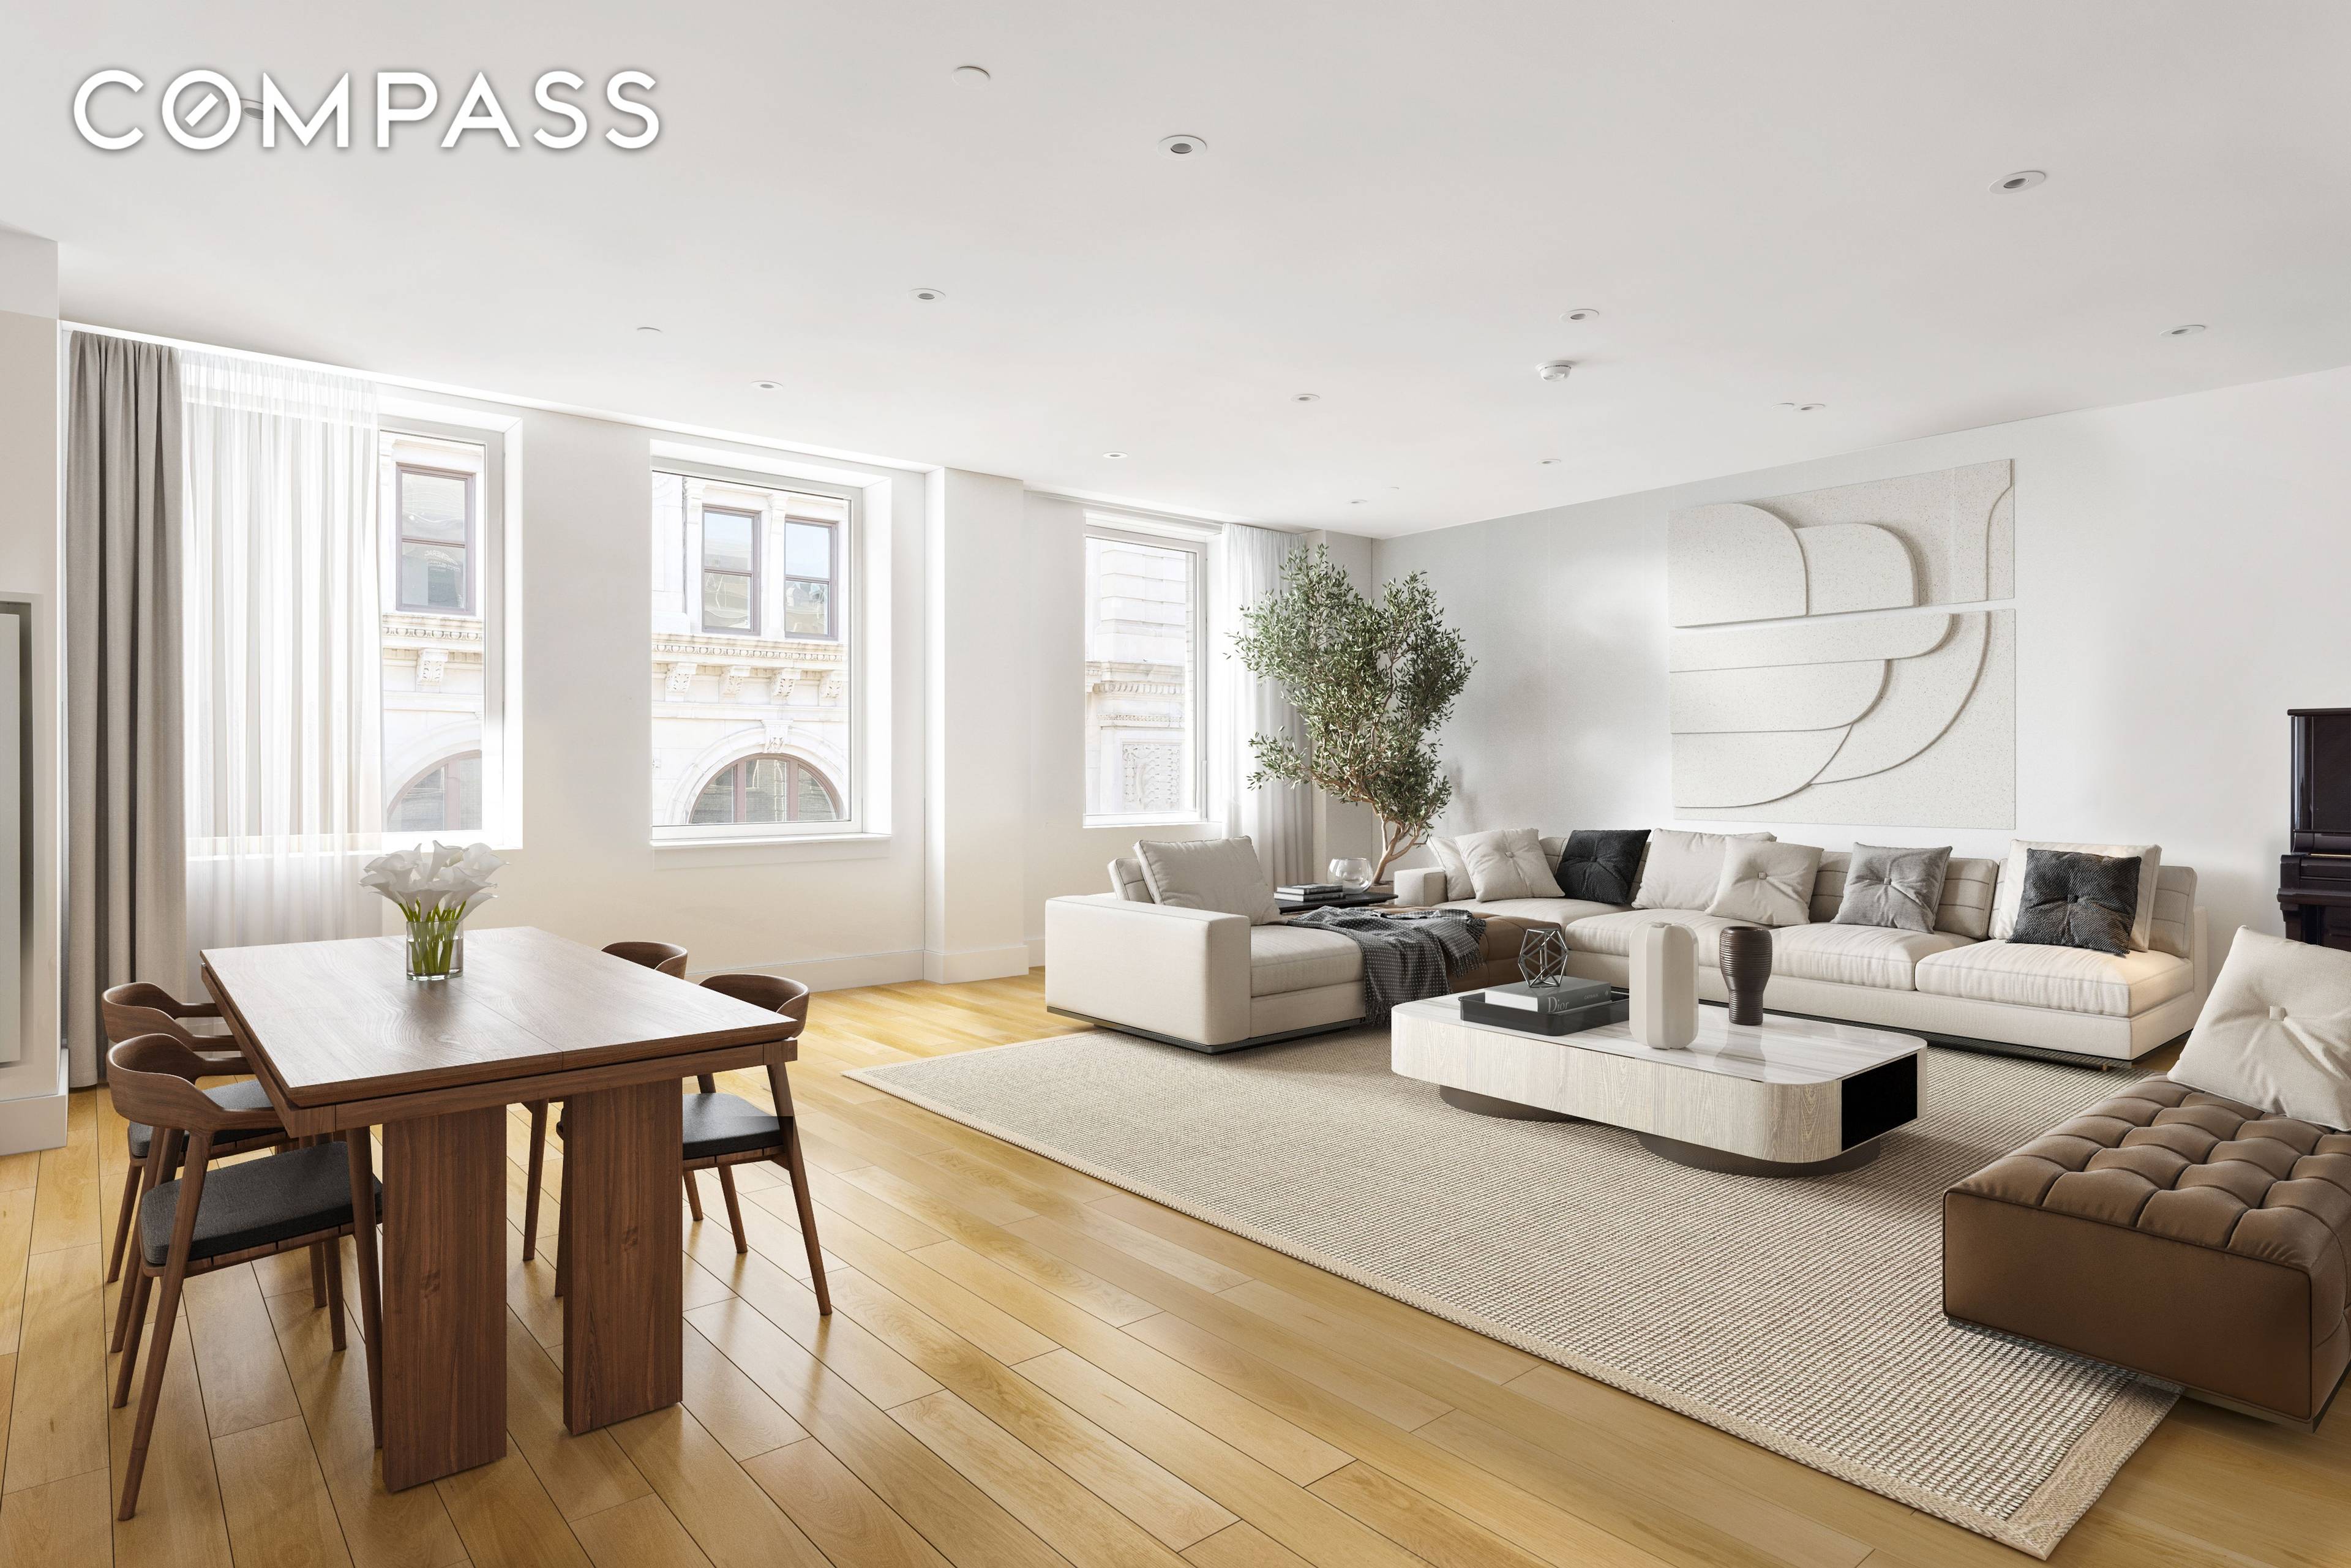 Embrace luxurious Tribeca loft living in this pristine three bedroom and four bathroom penthouse featuring impressive proportions and premium finishes in a full service contemporary condominium.